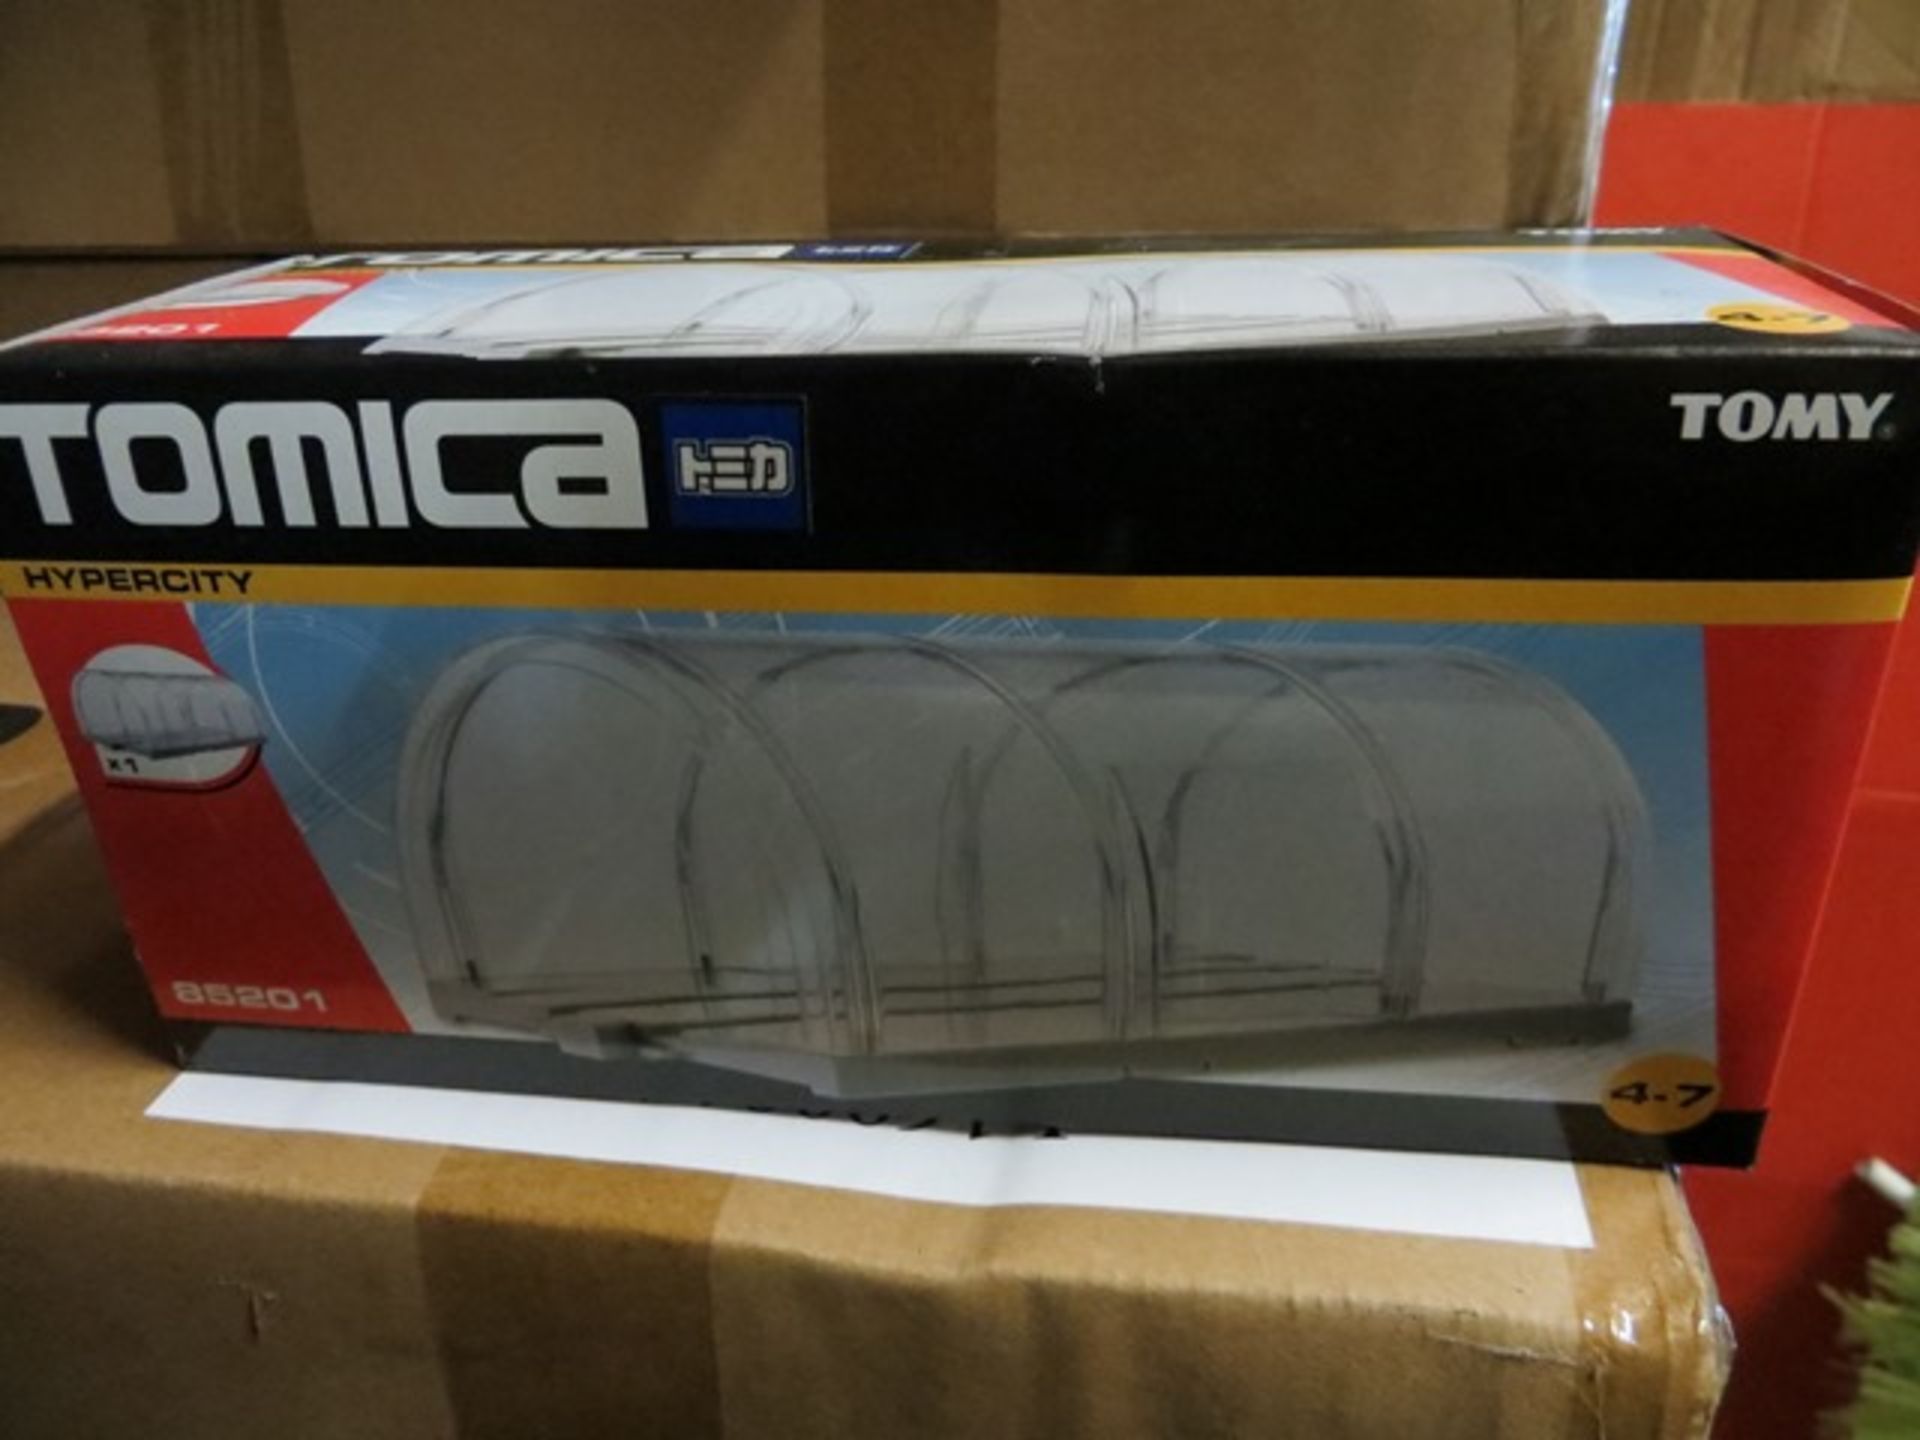 Forty Boxes of Tomy Tomica Clear Tunnel 4 to 7 years 12 per box (480 pieces) 19486 M6 85201Please